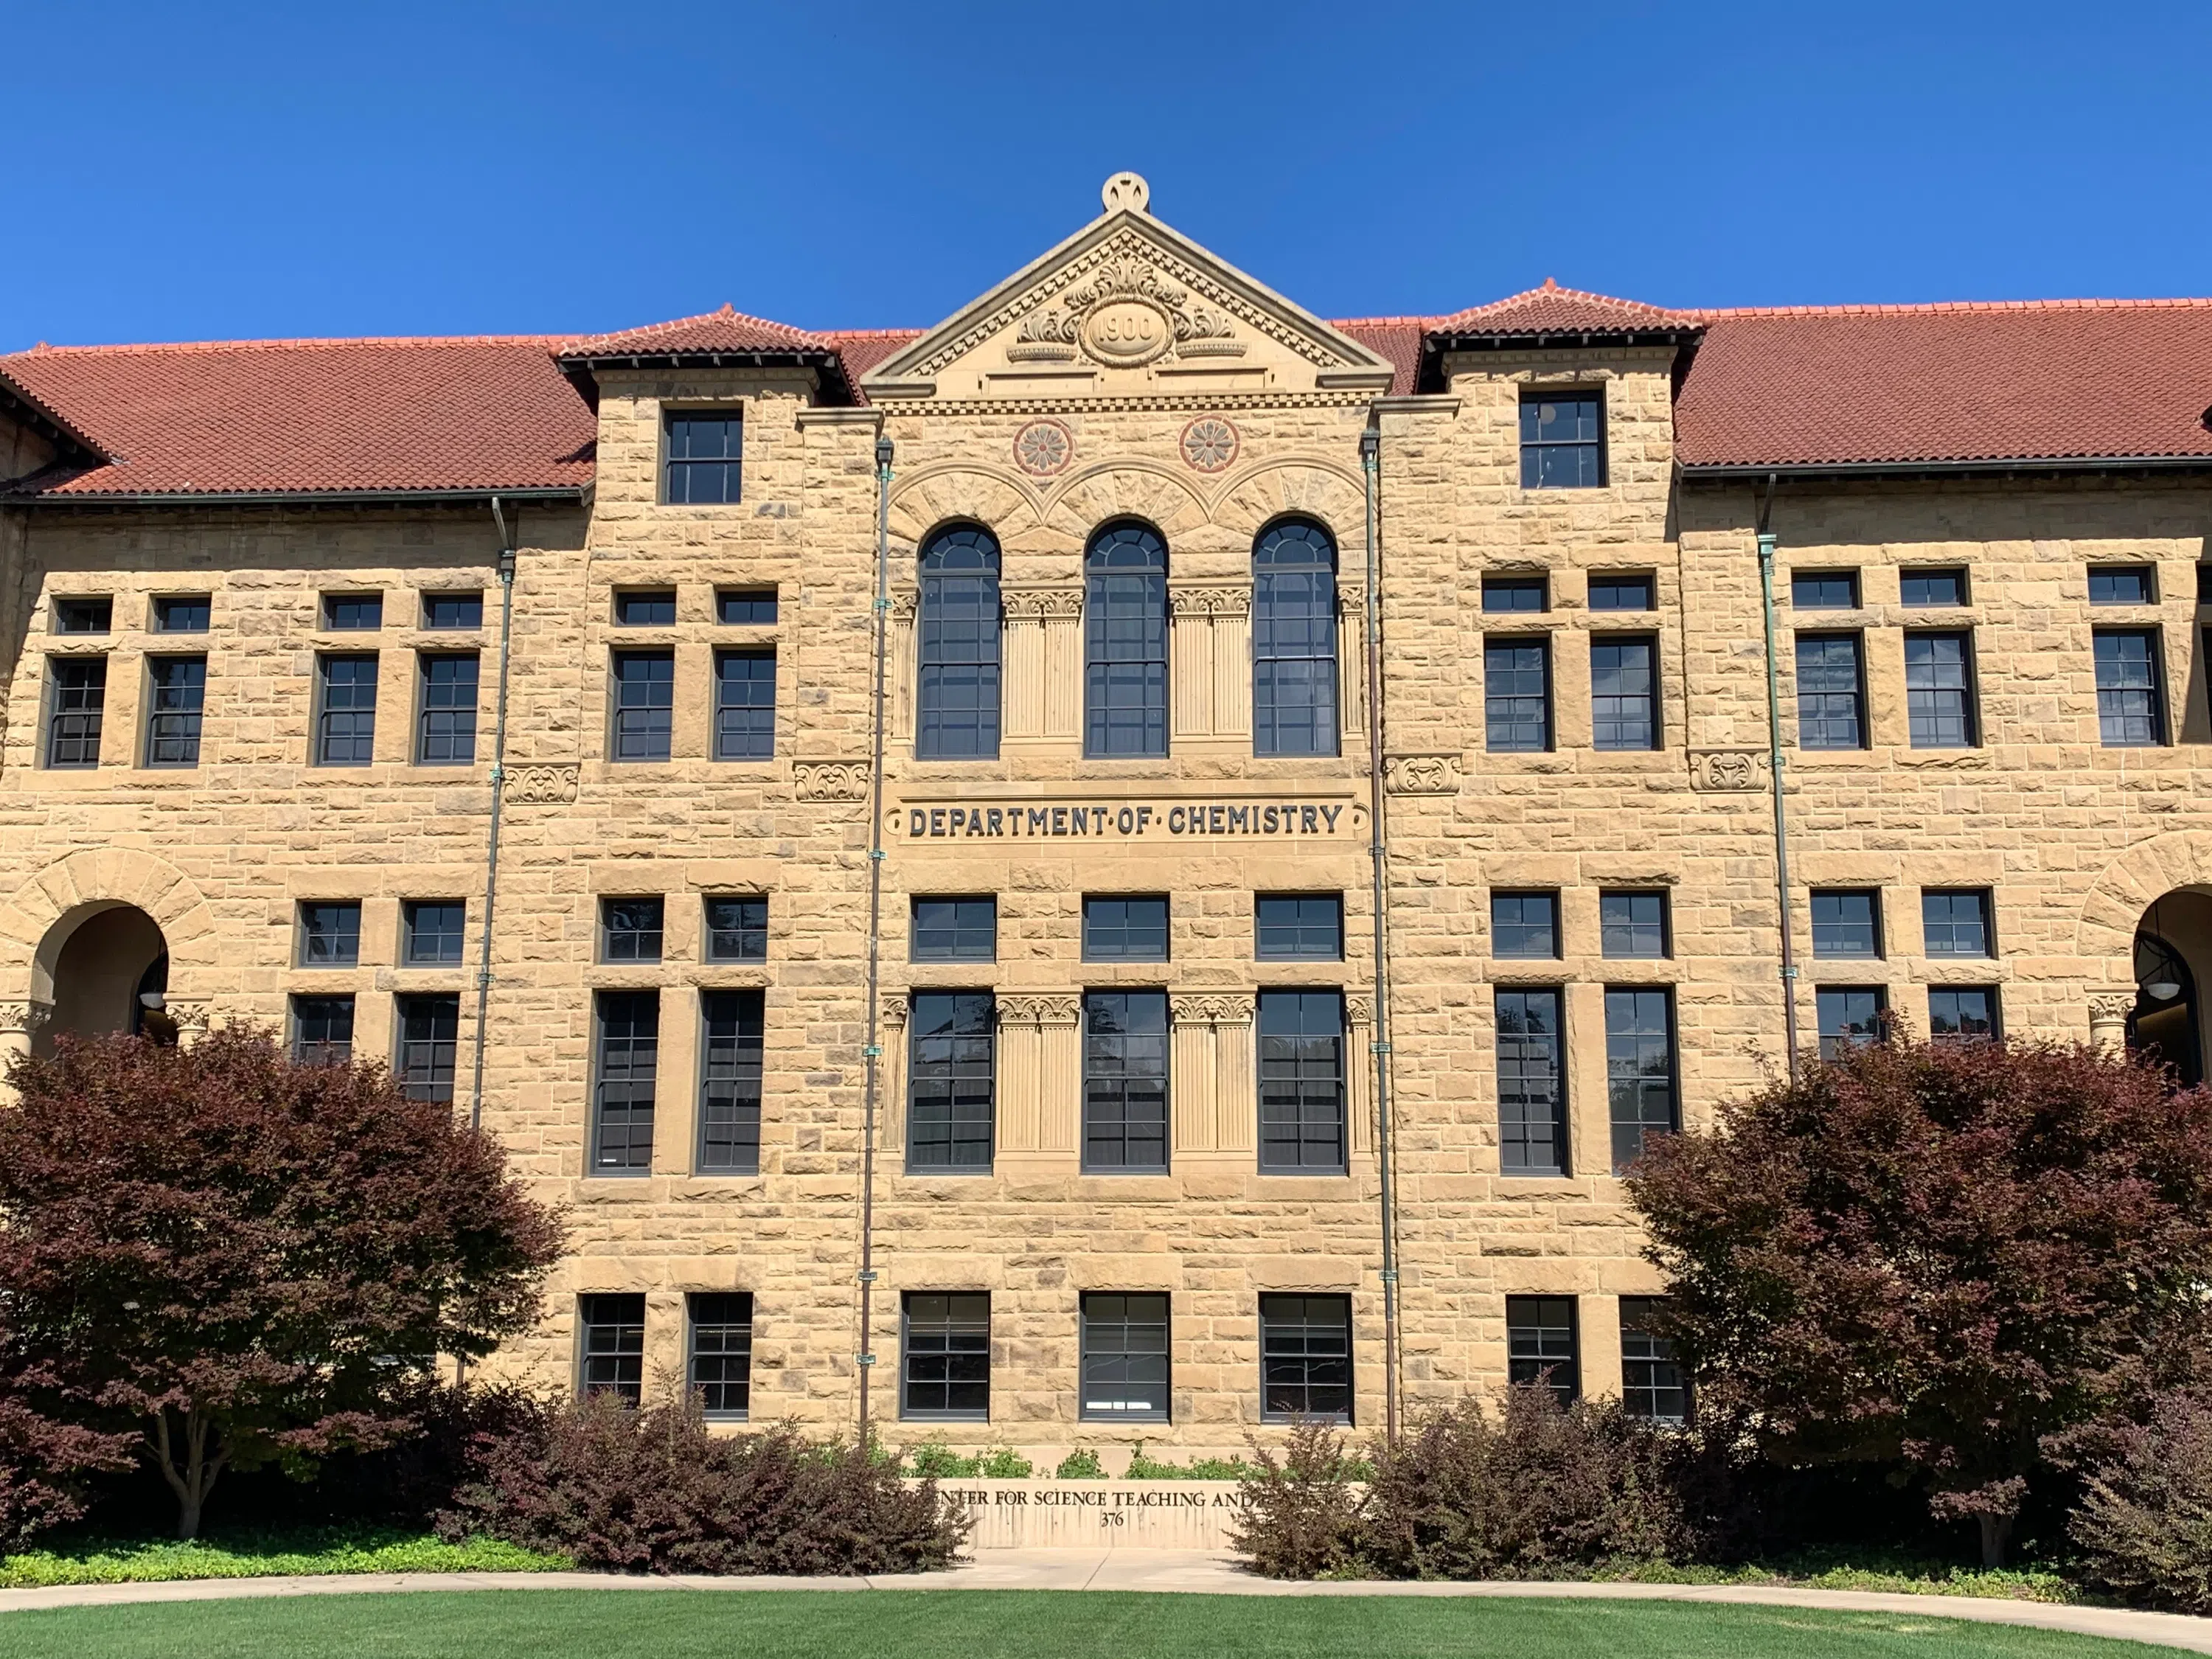 Front of a four-story sandstone building engraved with "Department of Chemistry" and "1900" and newly marked as the "Sapp Center for Science, Teaching and Learning"